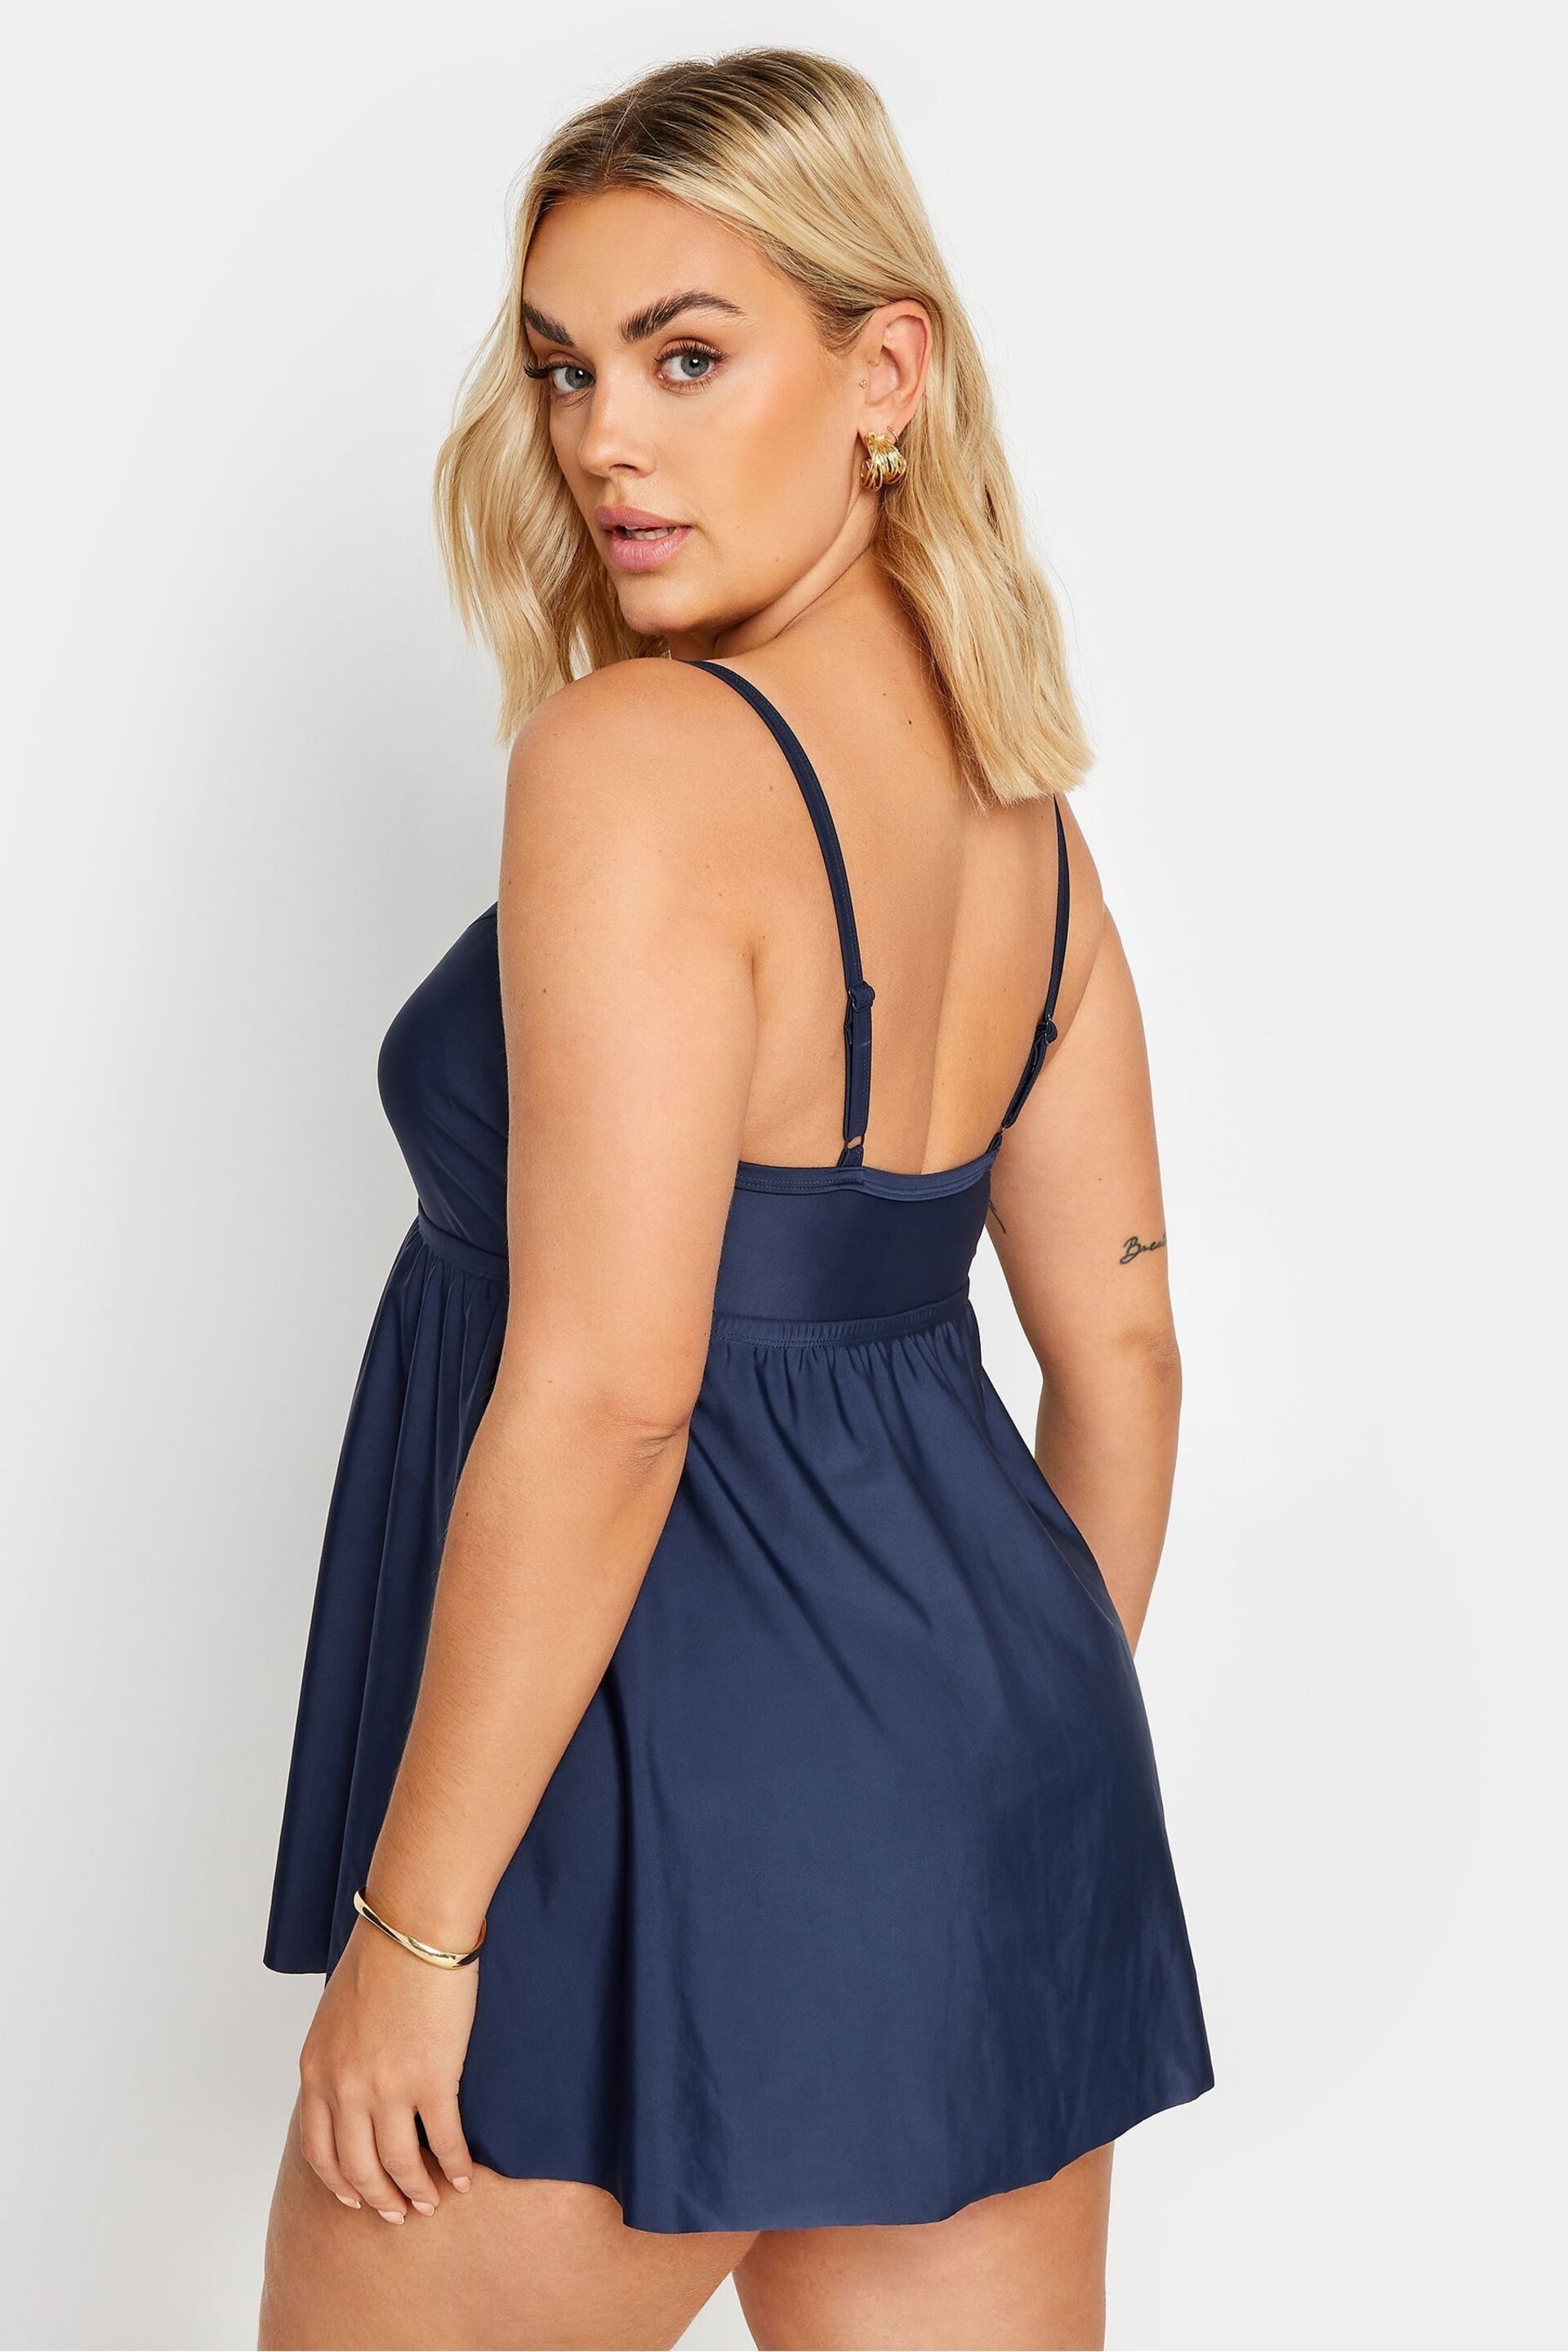 Yours Curve Blue Navy Swimdress - Image 3 of 6